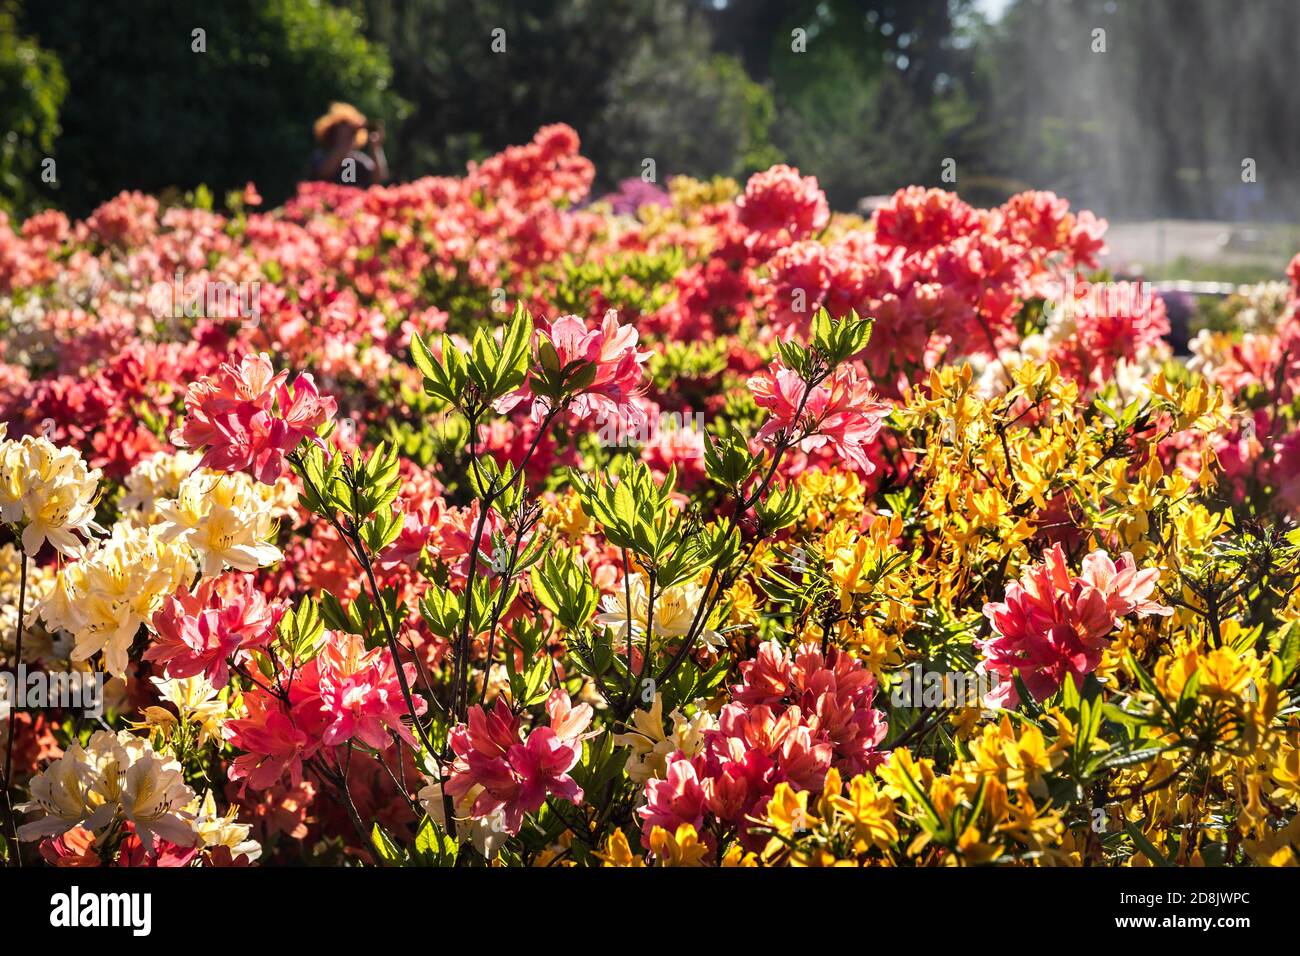 Rhododendron plants in bloom with flowers of different colors. Azalea bushes in the park with different flower colors. Rhododendron plants in bloom. R Stock Photo